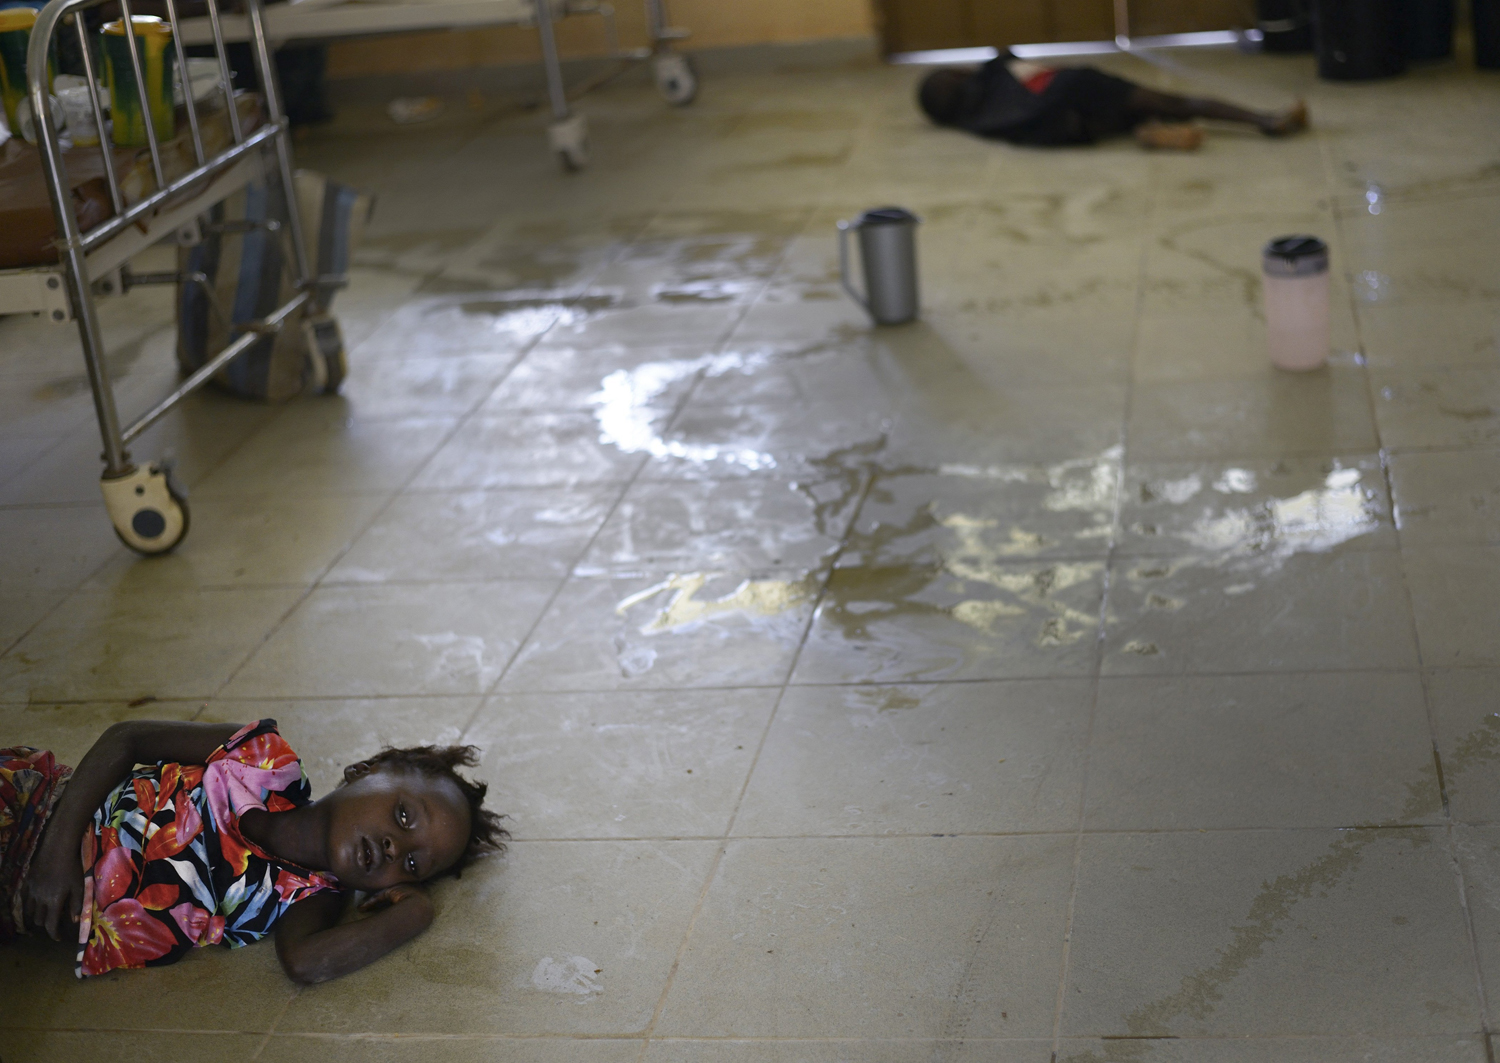 Mariattu Kanu, 4, who is suspected of being infected with Ebola, lies on the floor amid body fluids in a ward for Ebola victims at a hospital in Makeni, Sierra Leone, Sept. 27, 2014.